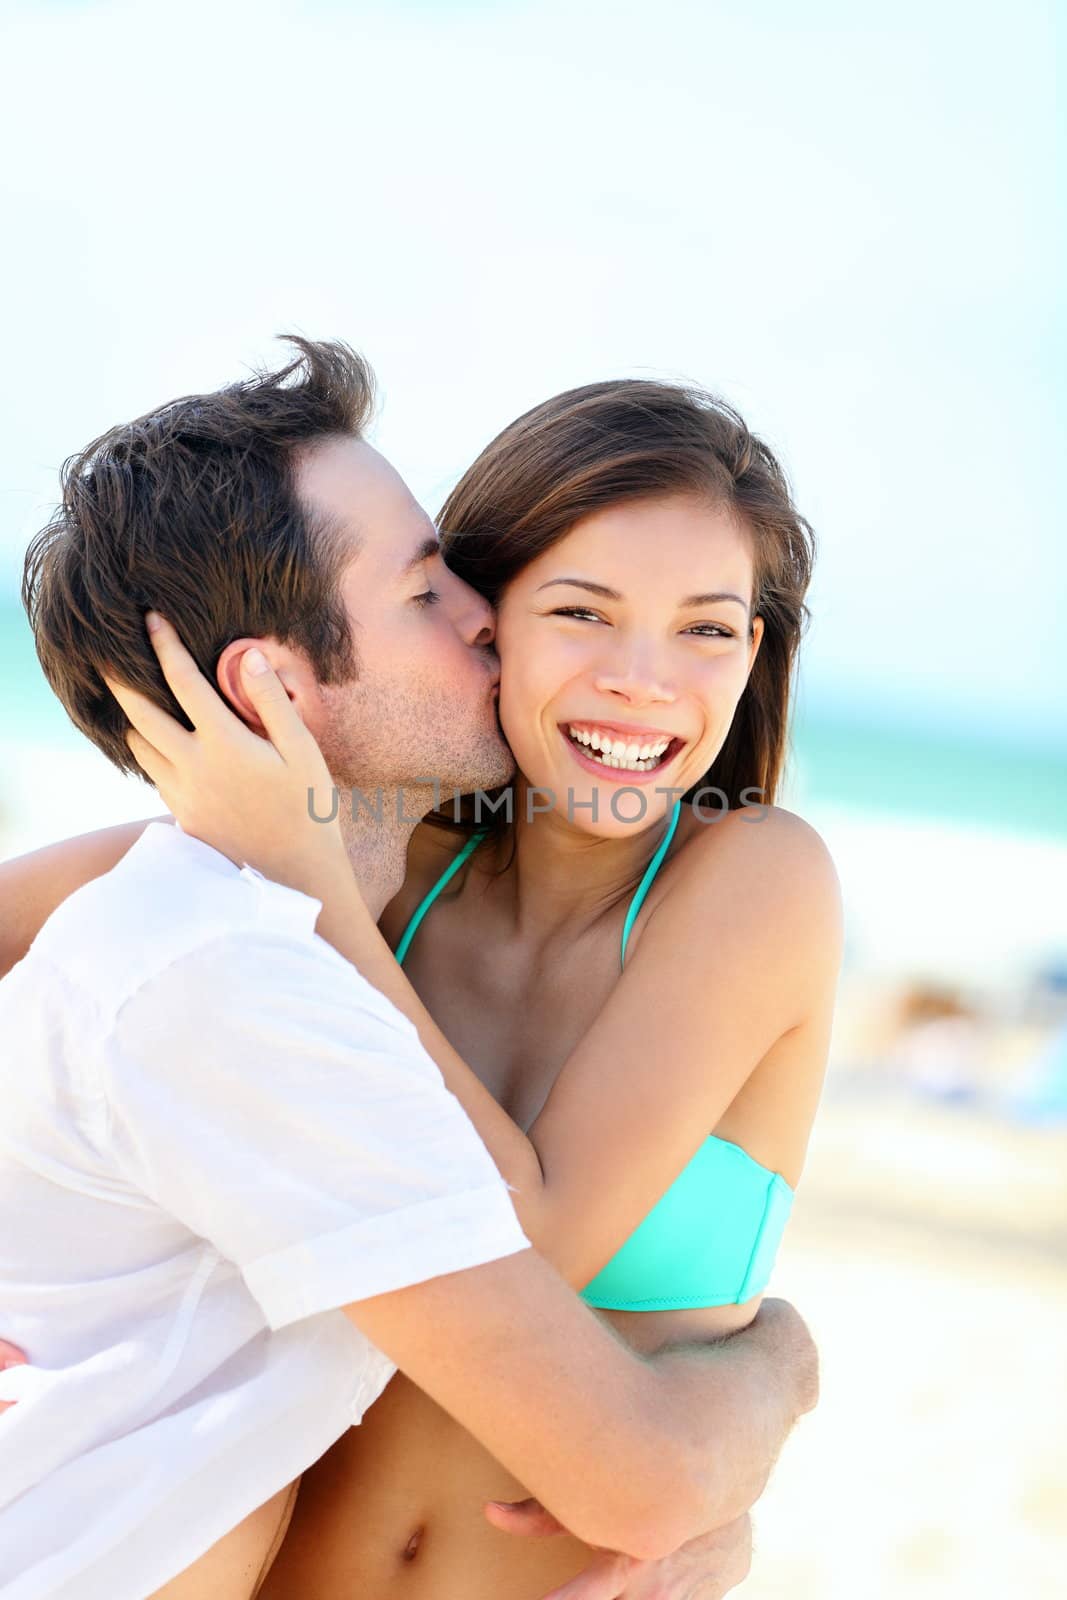 Happy couple kissing and embracing in joyful happiness showing love during summer beach vacation. Beautiful young interracial couple, Asian woman, Caucasian man outdoors.